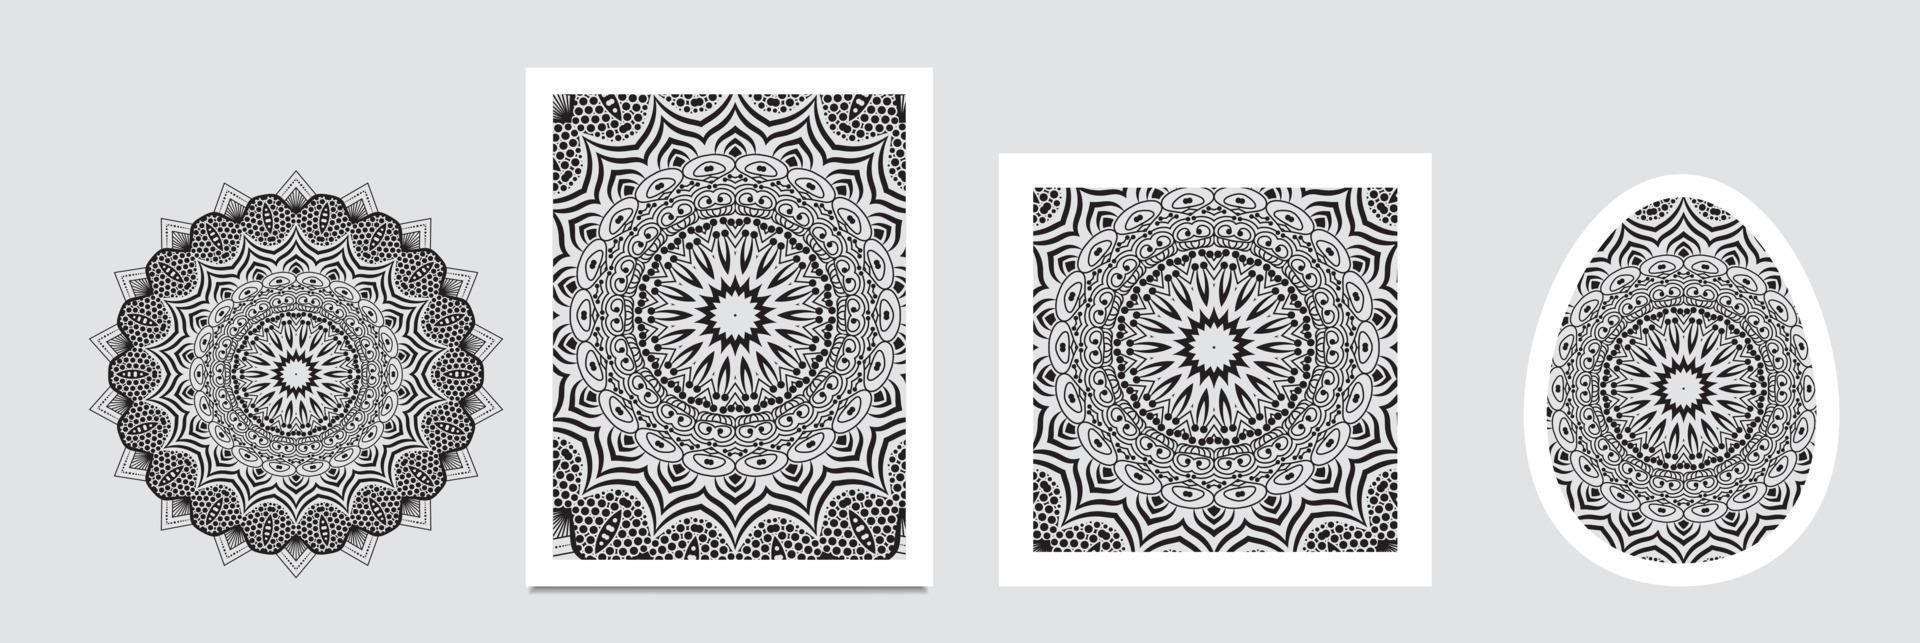 Indian floral paisley medallion banners. Ethnic Mandala ornament. Vector Henna tattoo style. Can be used for textile, greeting card, coloring book